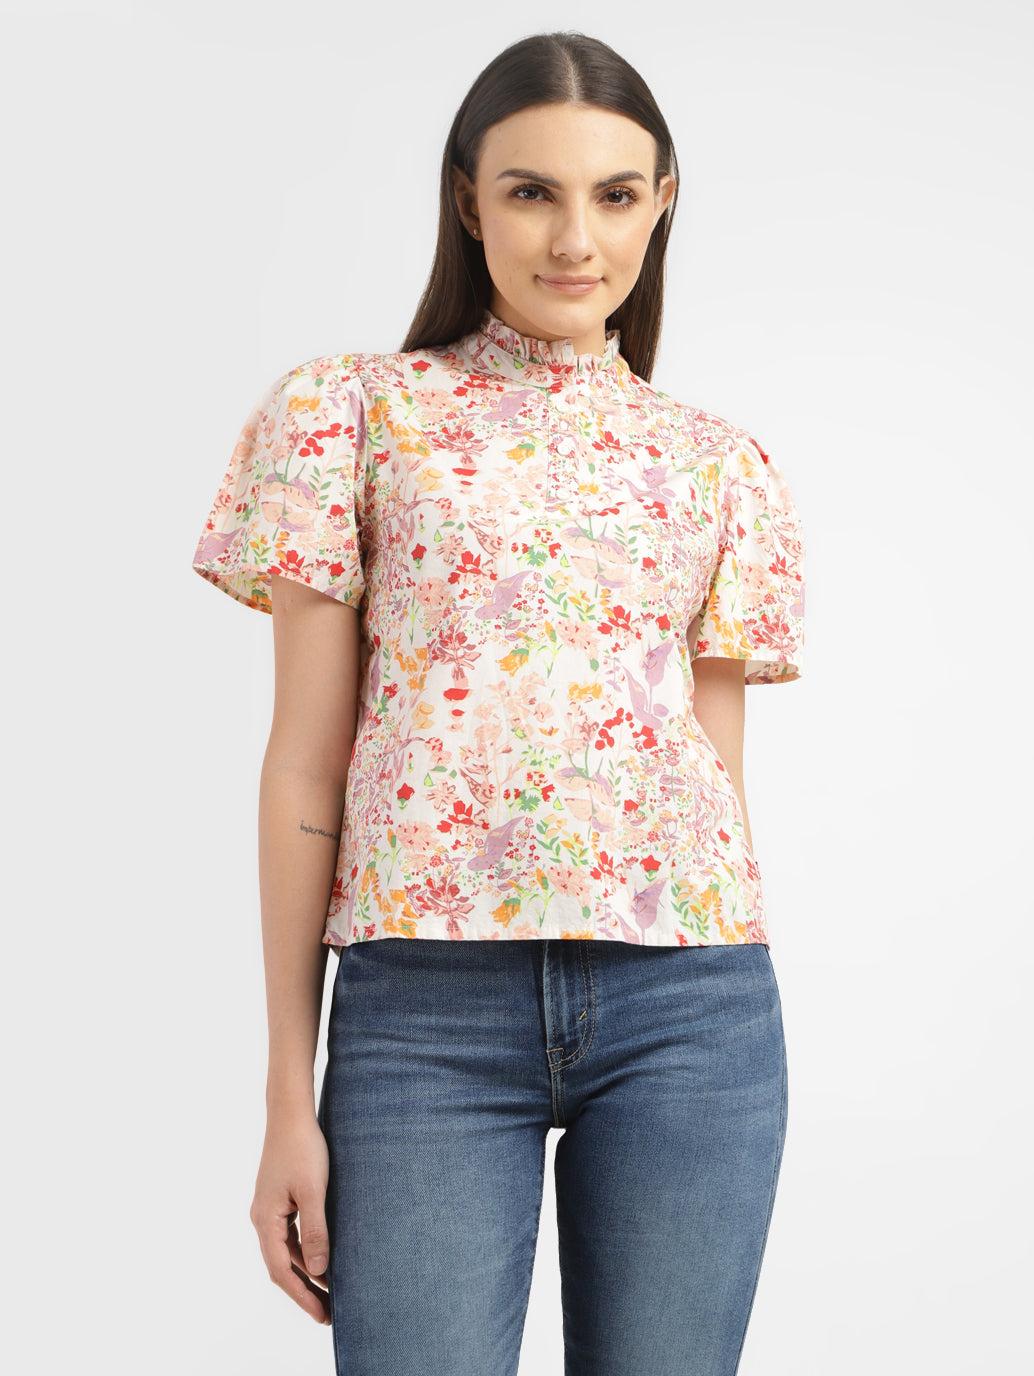 women's-floral-print-band-neck-top